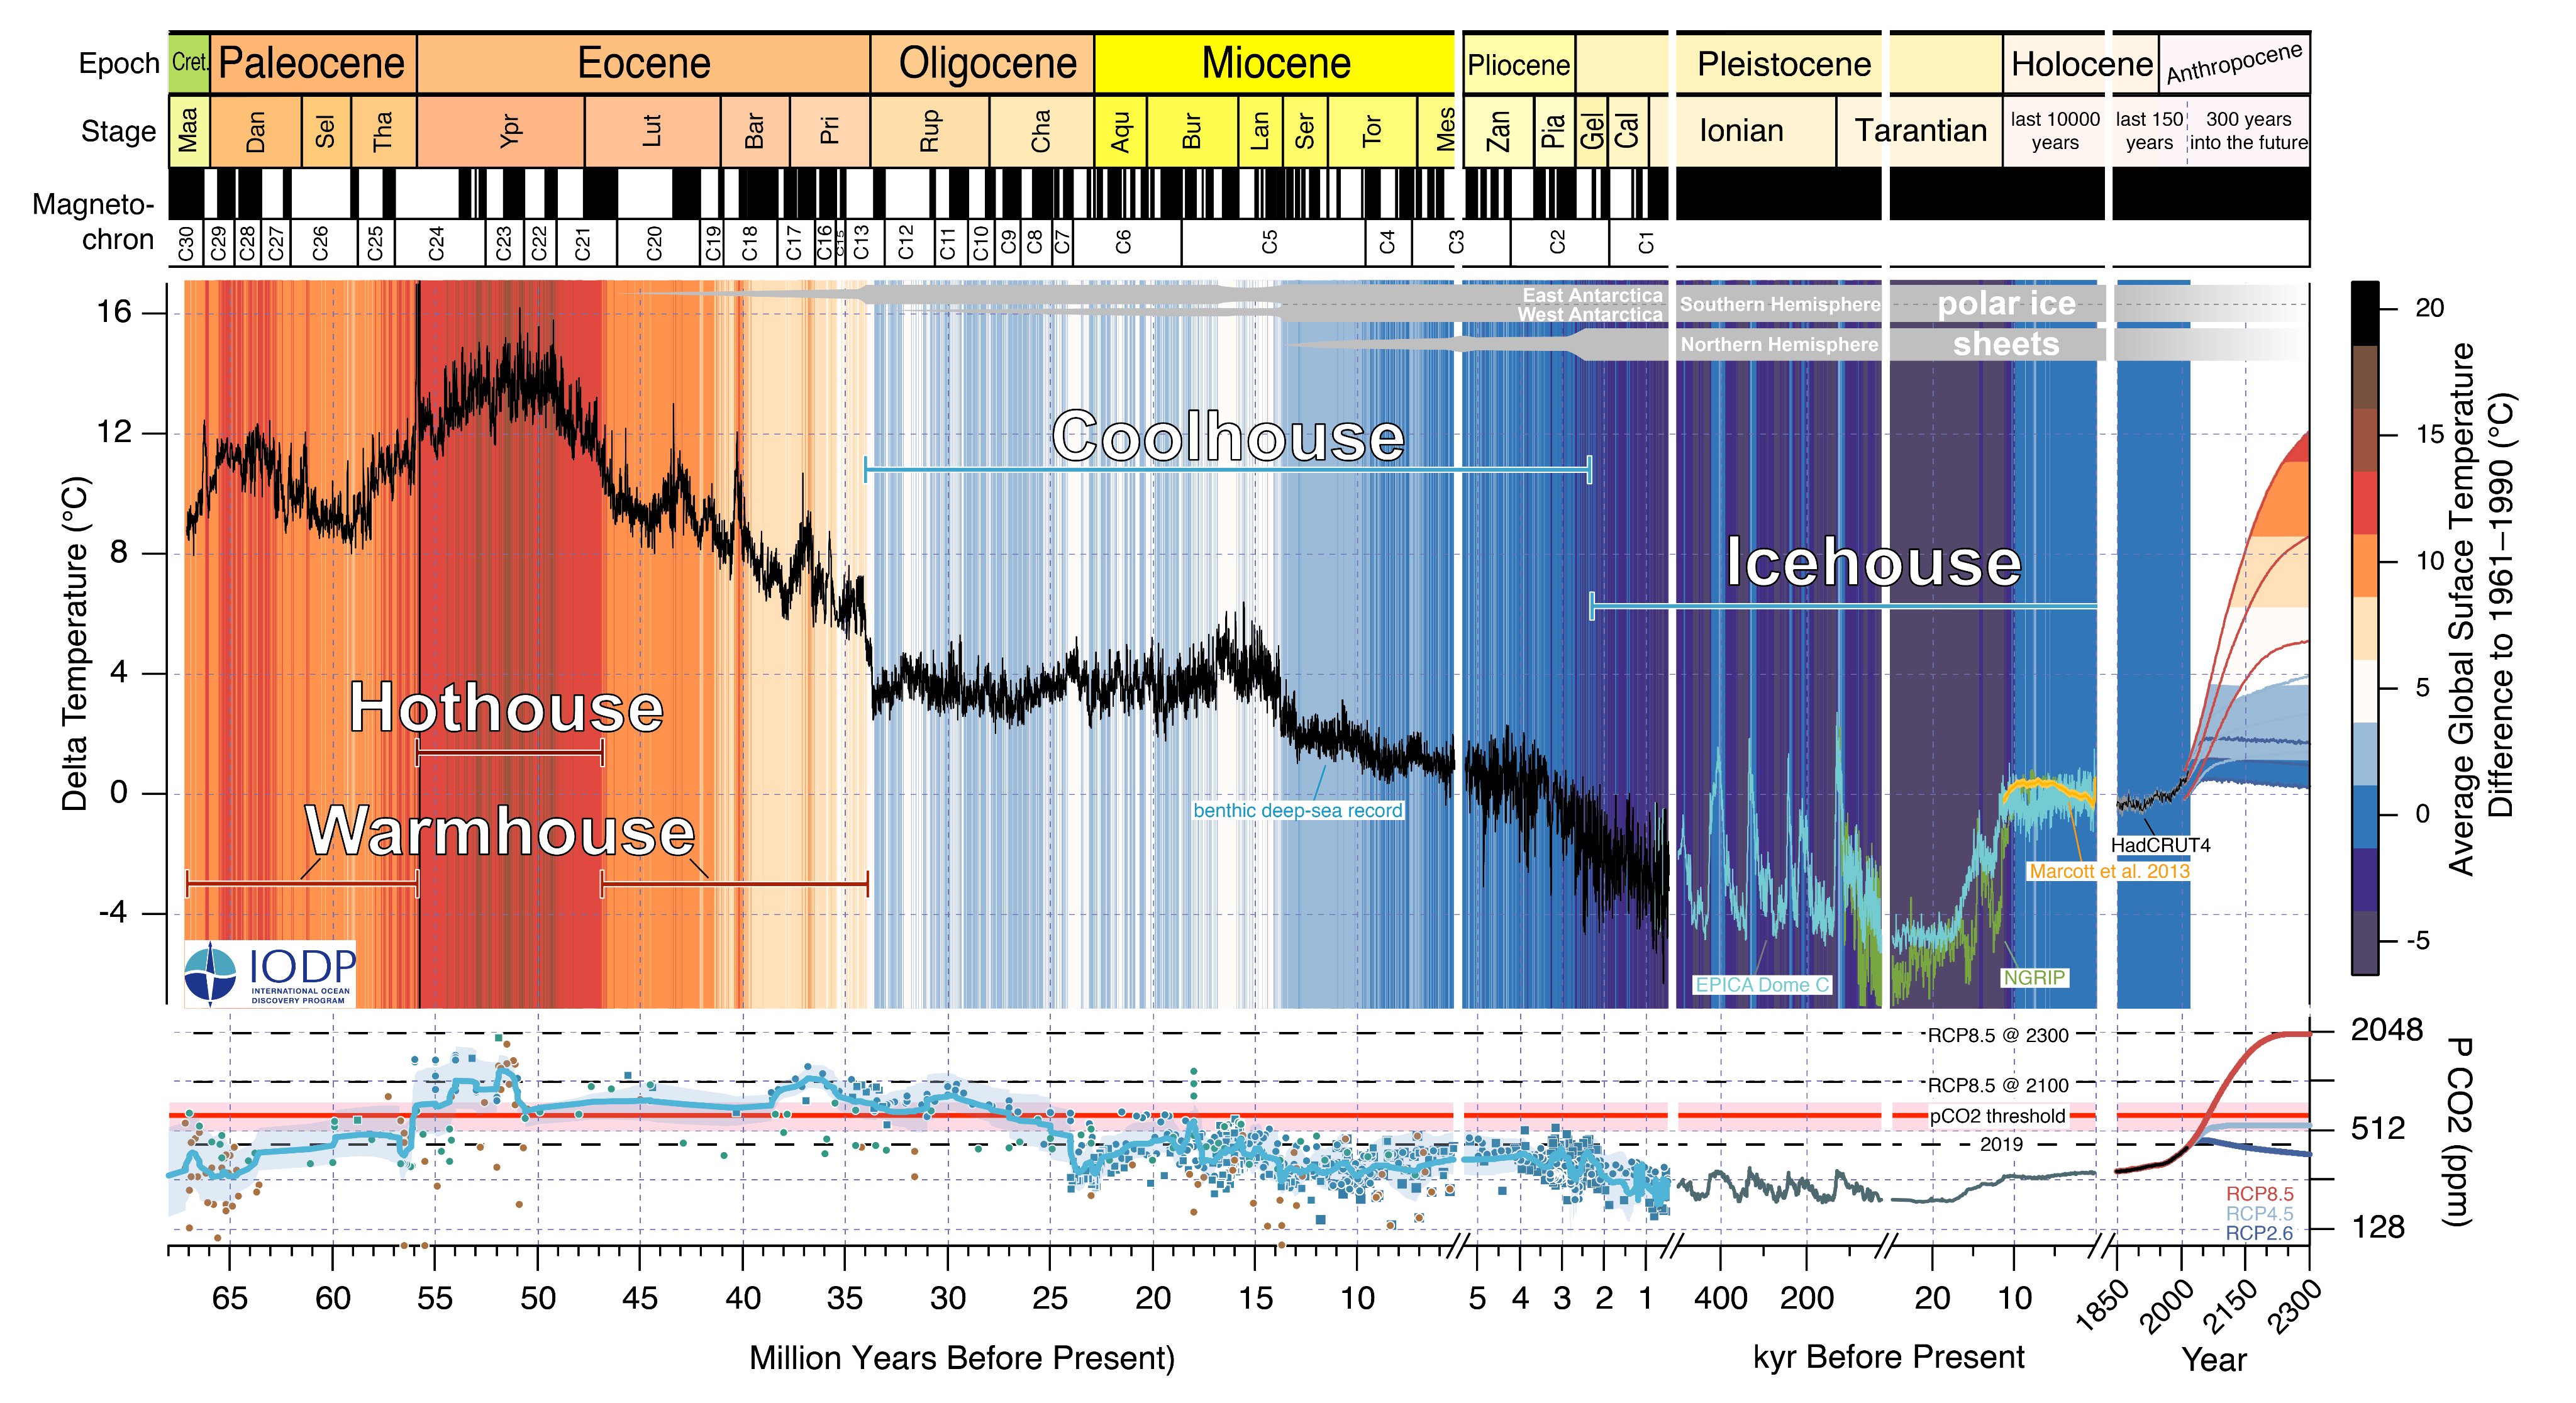 Climate Evolution during the Cenozoic